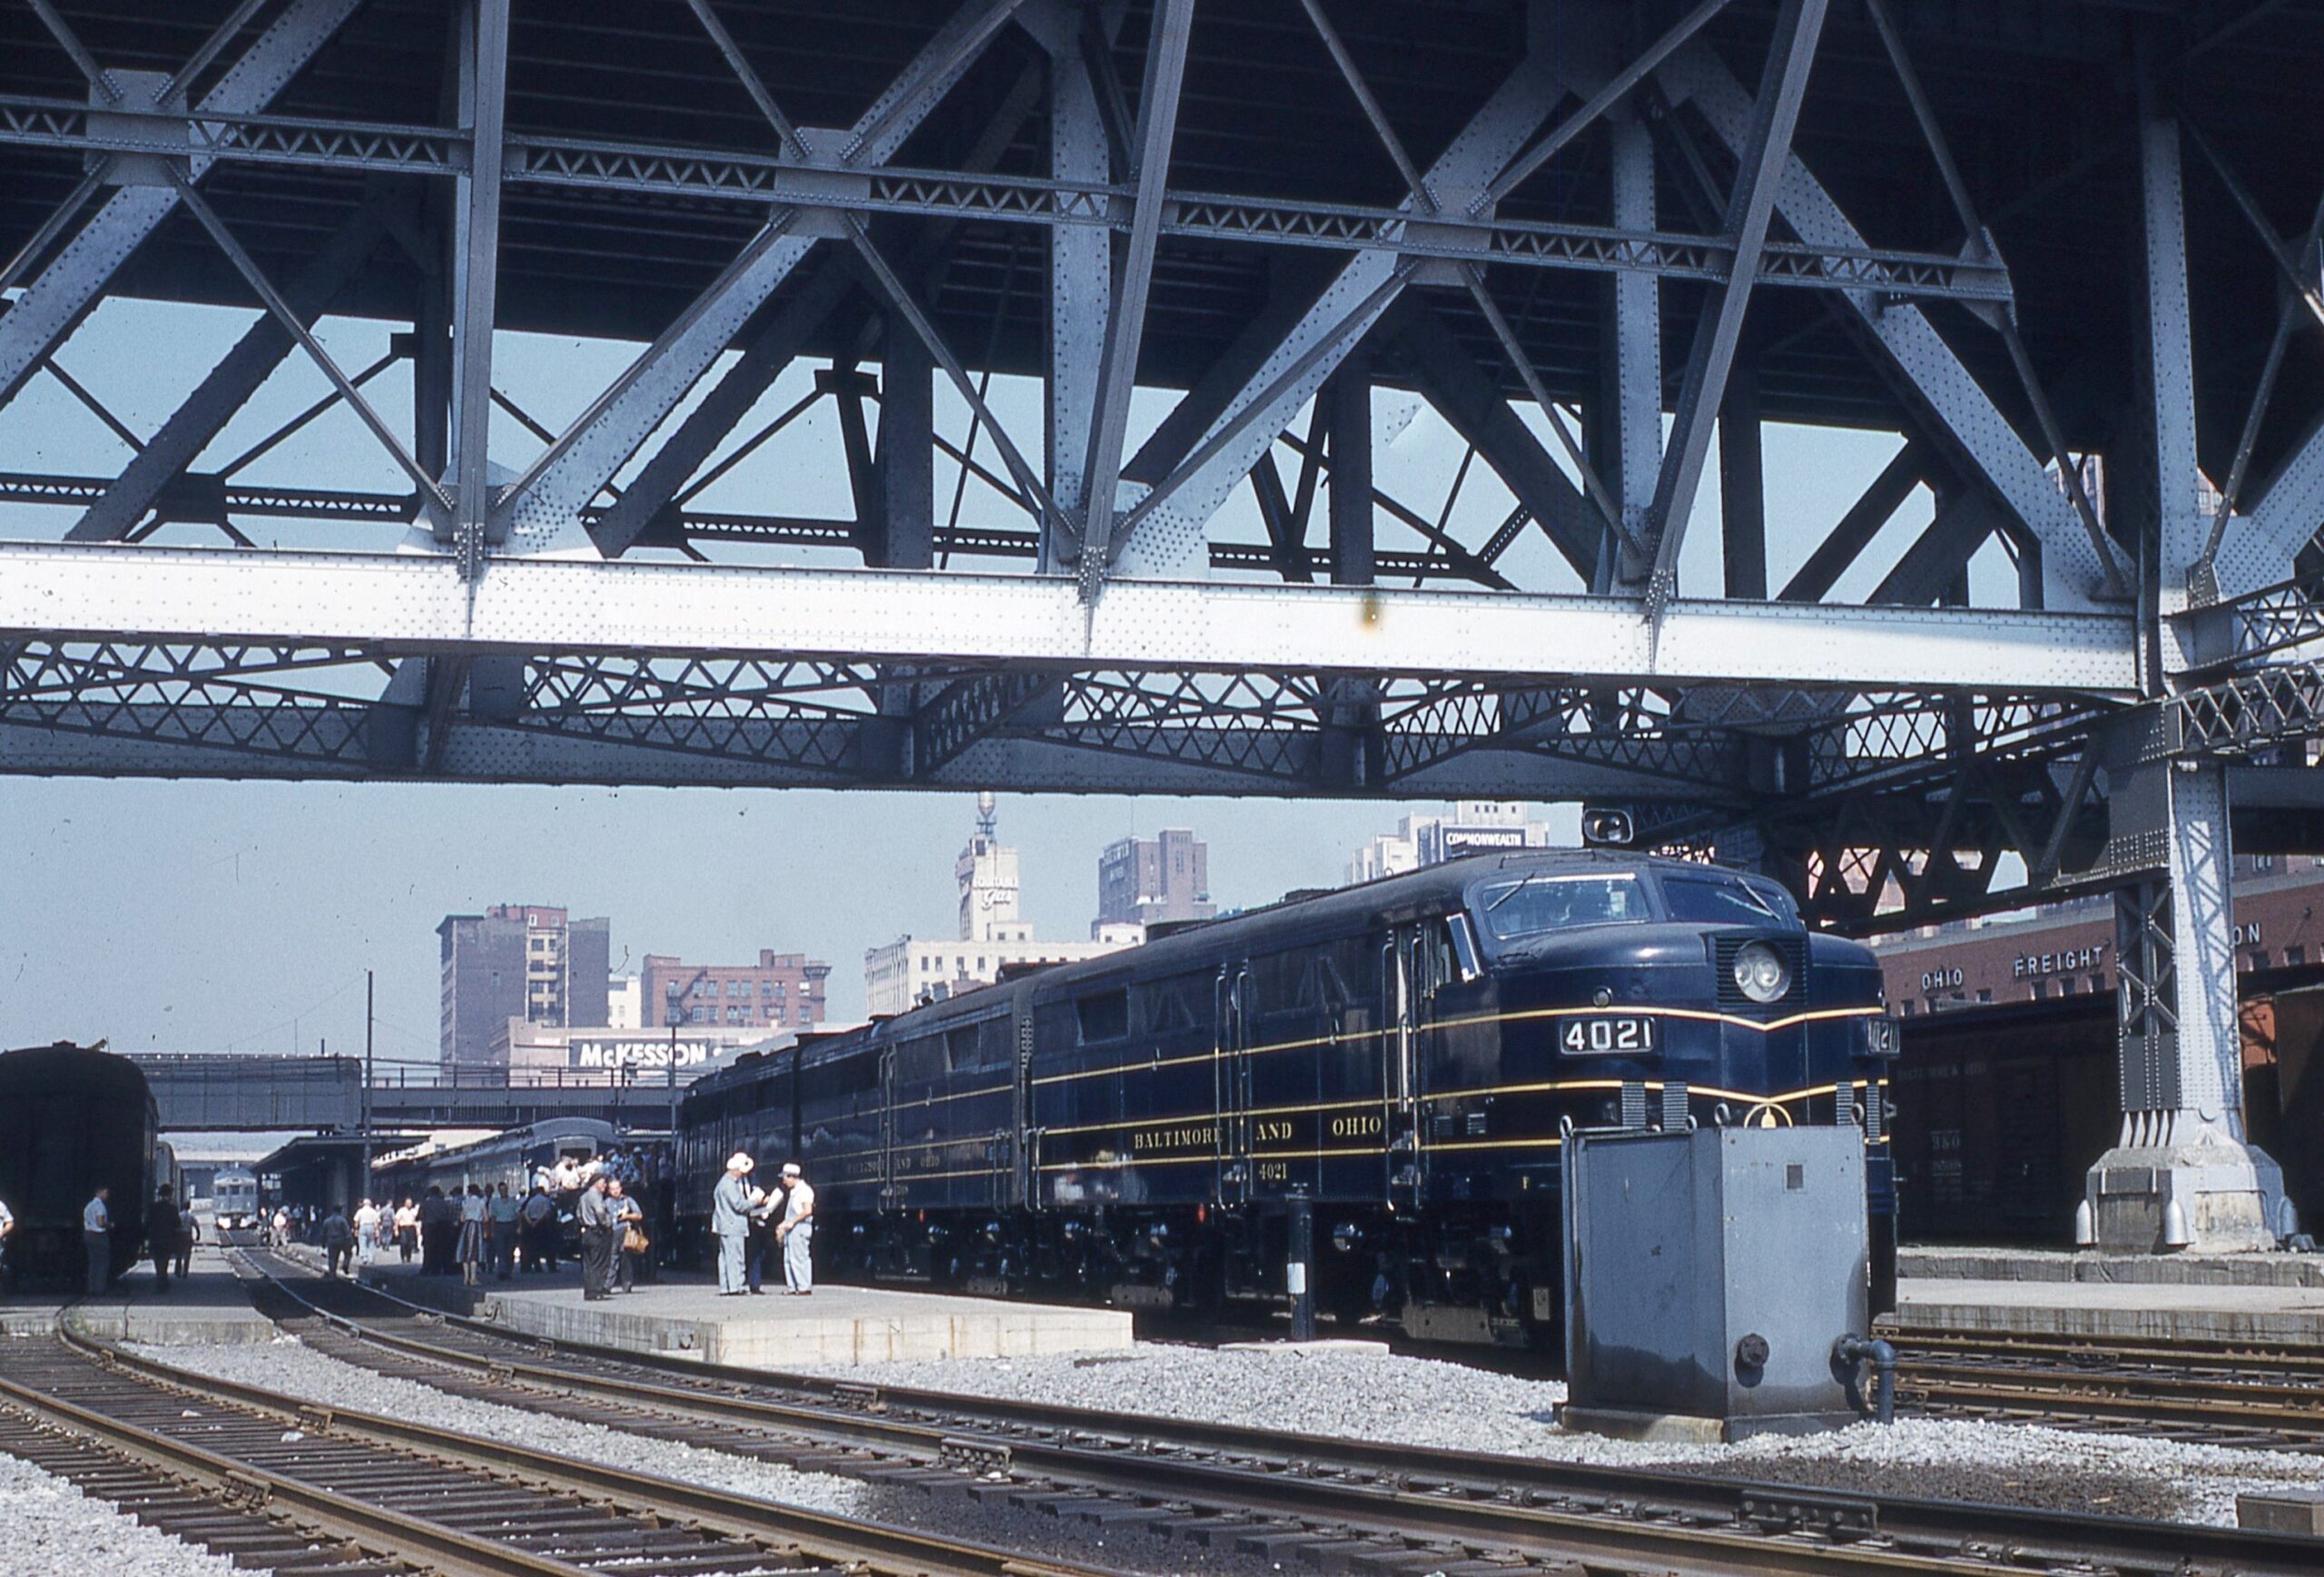 Baltimore and Ohio | Pittsburgh, Pennsylvania | Class FA-2 #4021 + FA-2 B and FA2 Alco Diesel-electric locomotive | Grant Avenue B&O Station | 1959 NRHS Convention Special Passenger Train | September 6, 1959 | NRHS Collection